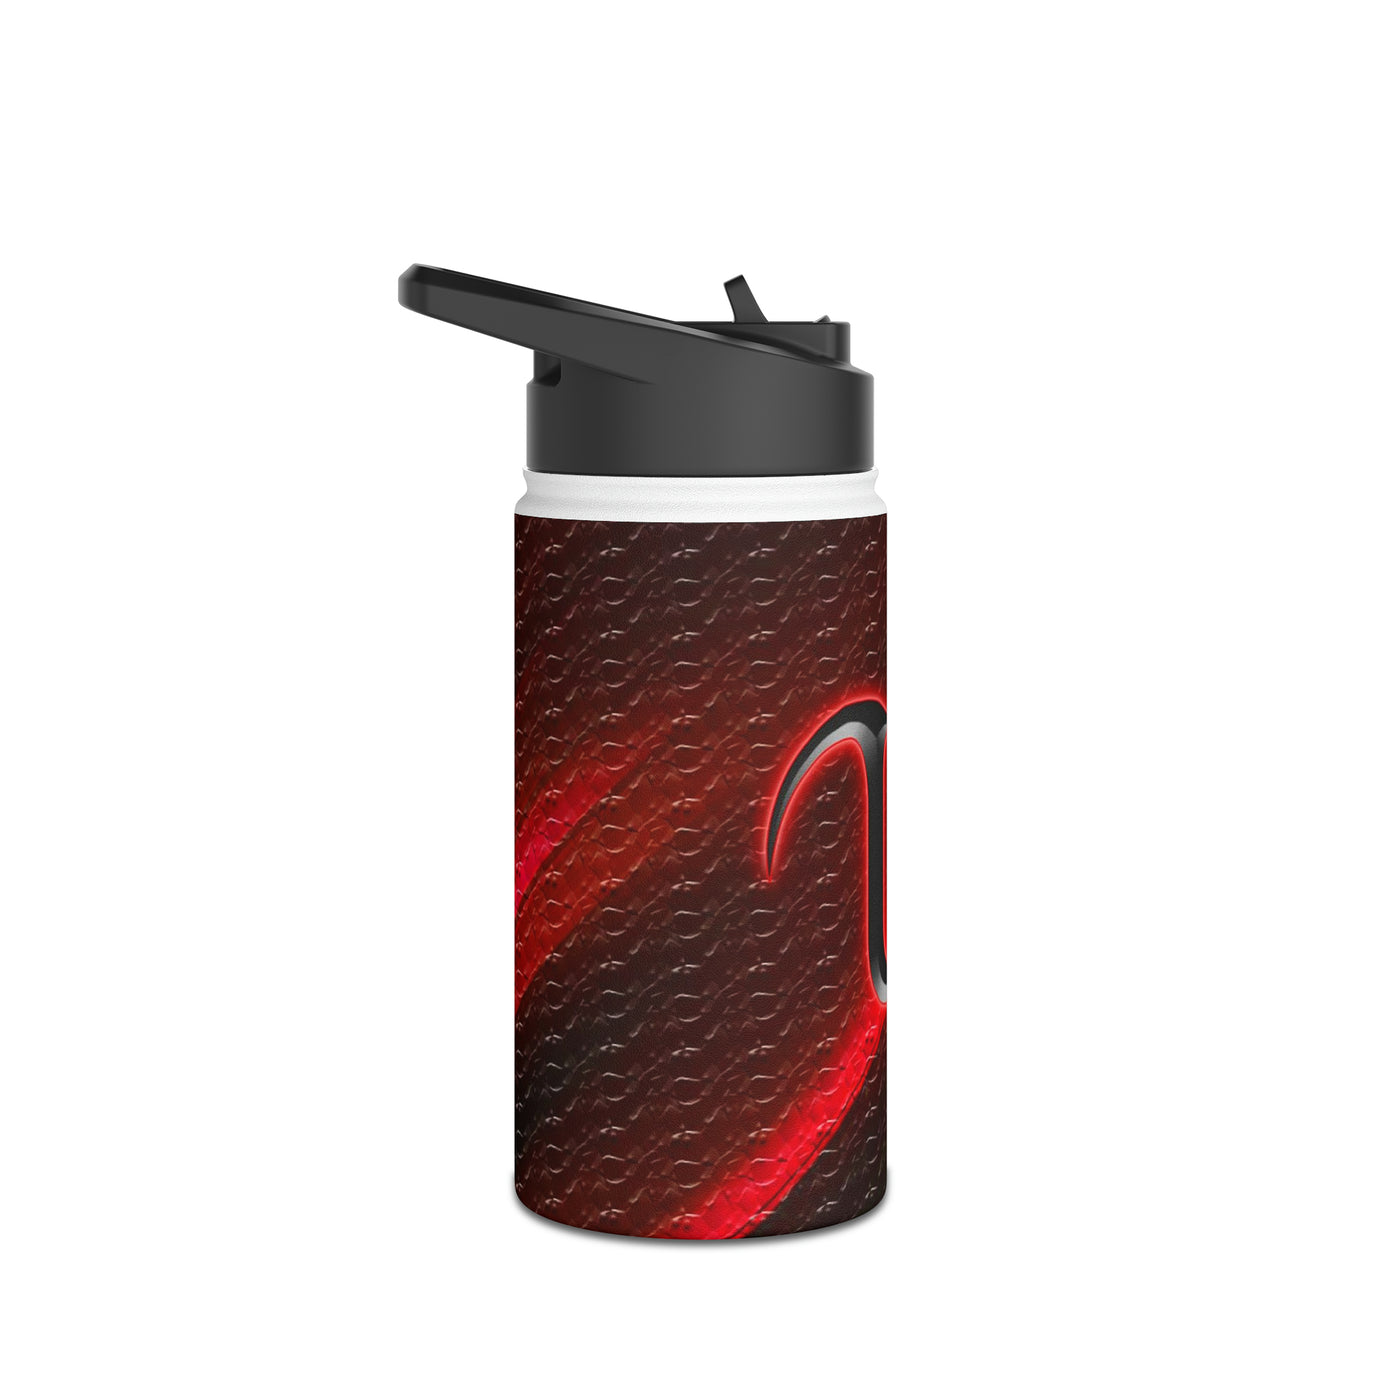  Stainless Steel Water Bottle with Standard Lid - Reusable and durable stainless steel bottle featuring a standard lid, ideal for hydration on-the-go during daily activities or workouts.